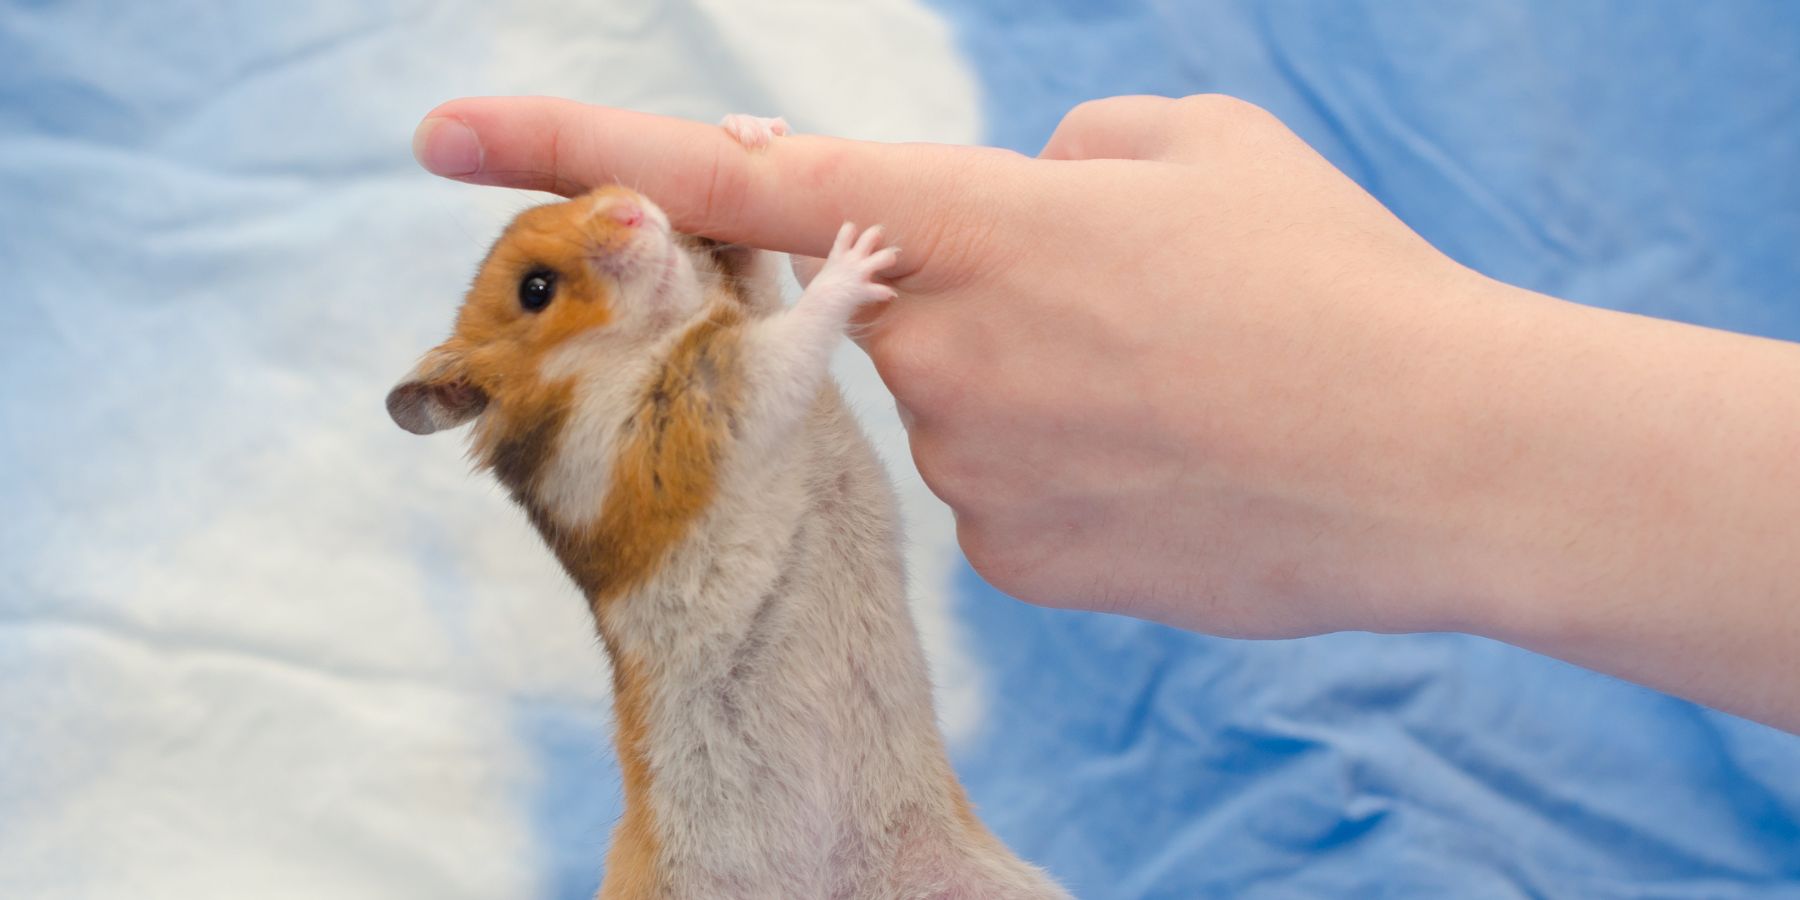 What Is The Most Common Illness In Hamsters?